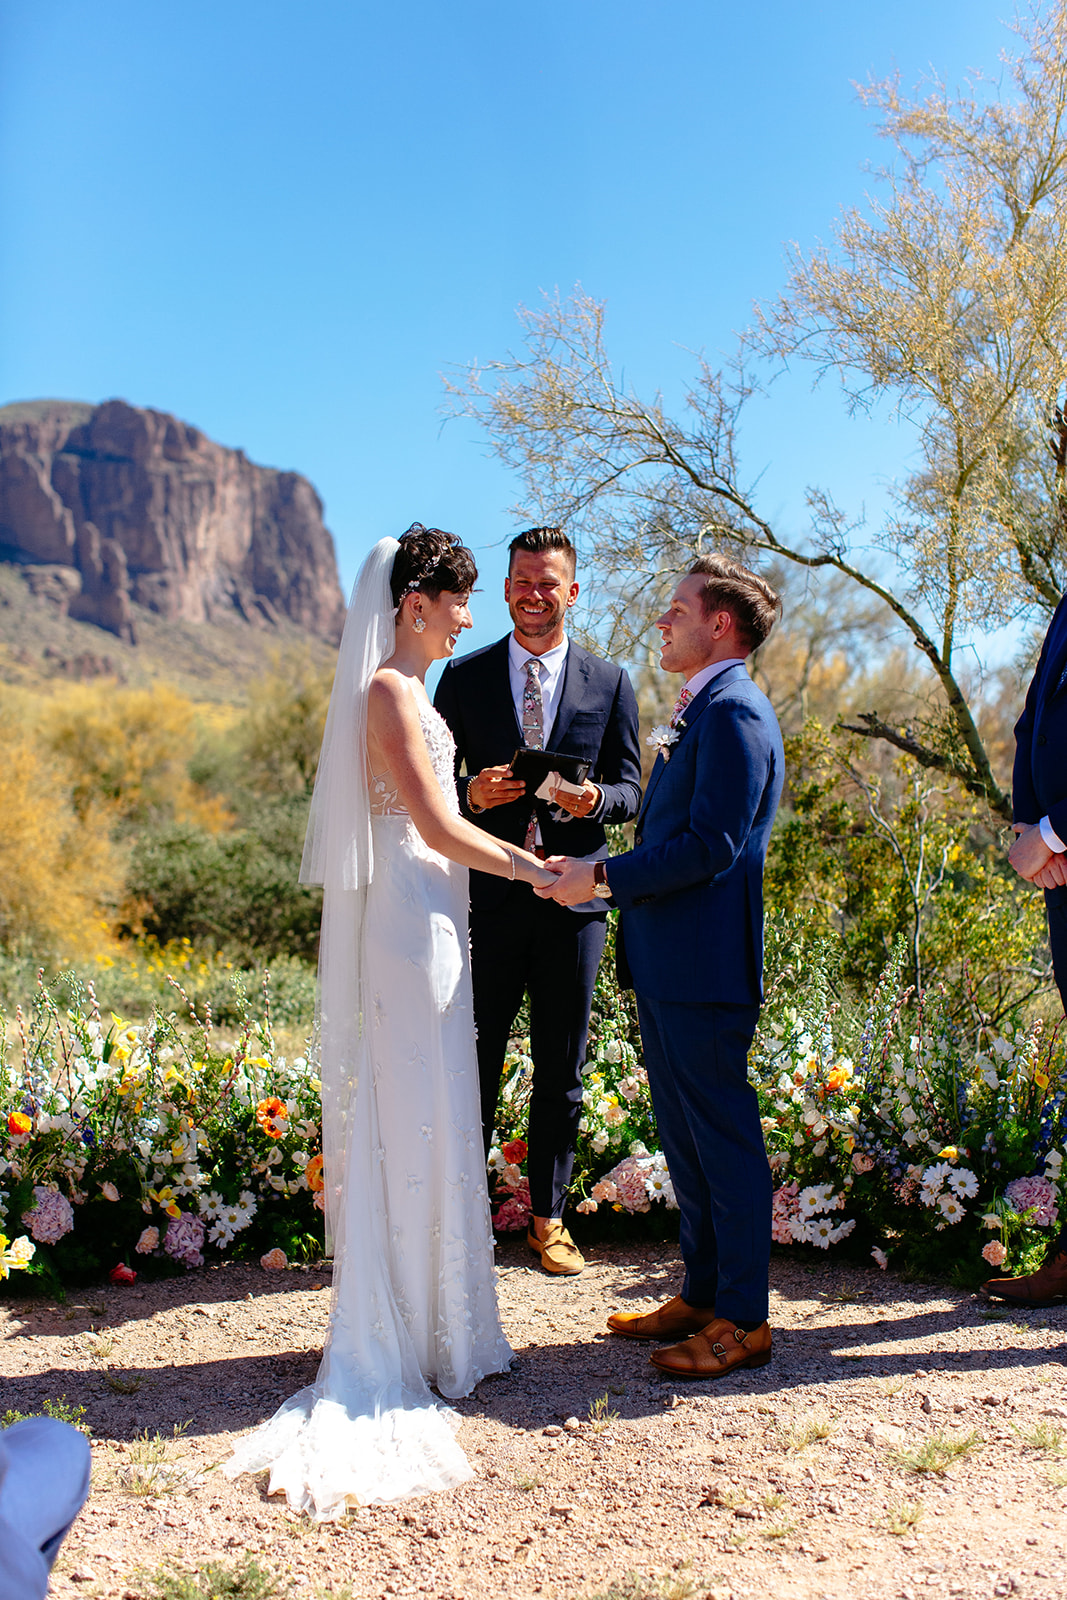 A bride and groom exchanging vows outdoors, officiated by a man, with a mountain backdrop and vibrant flowerbeds under a clear sky at a garden party wedding